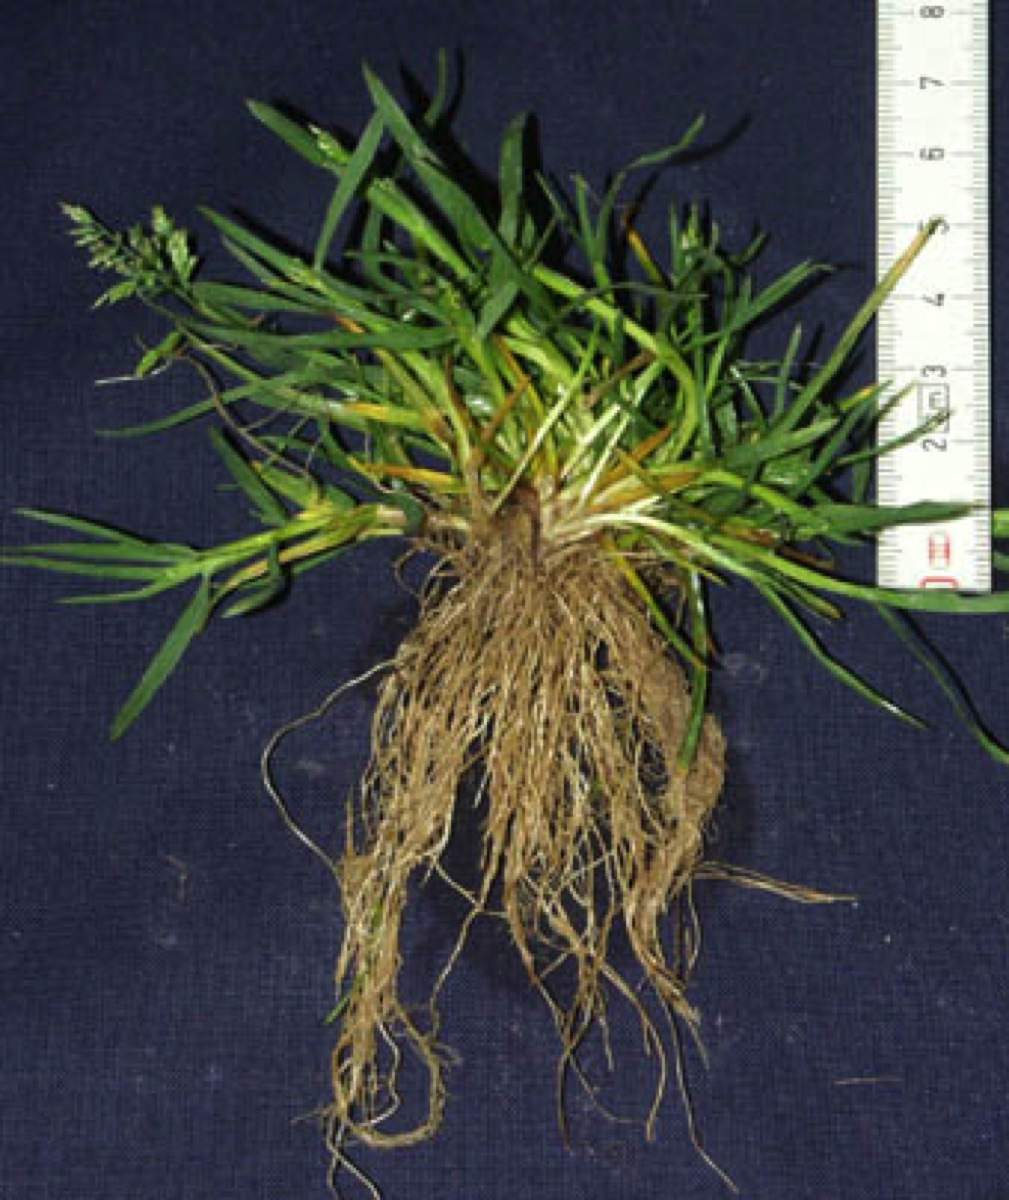 Poa Annua Weed Control - 18 Recommended Treatment Options